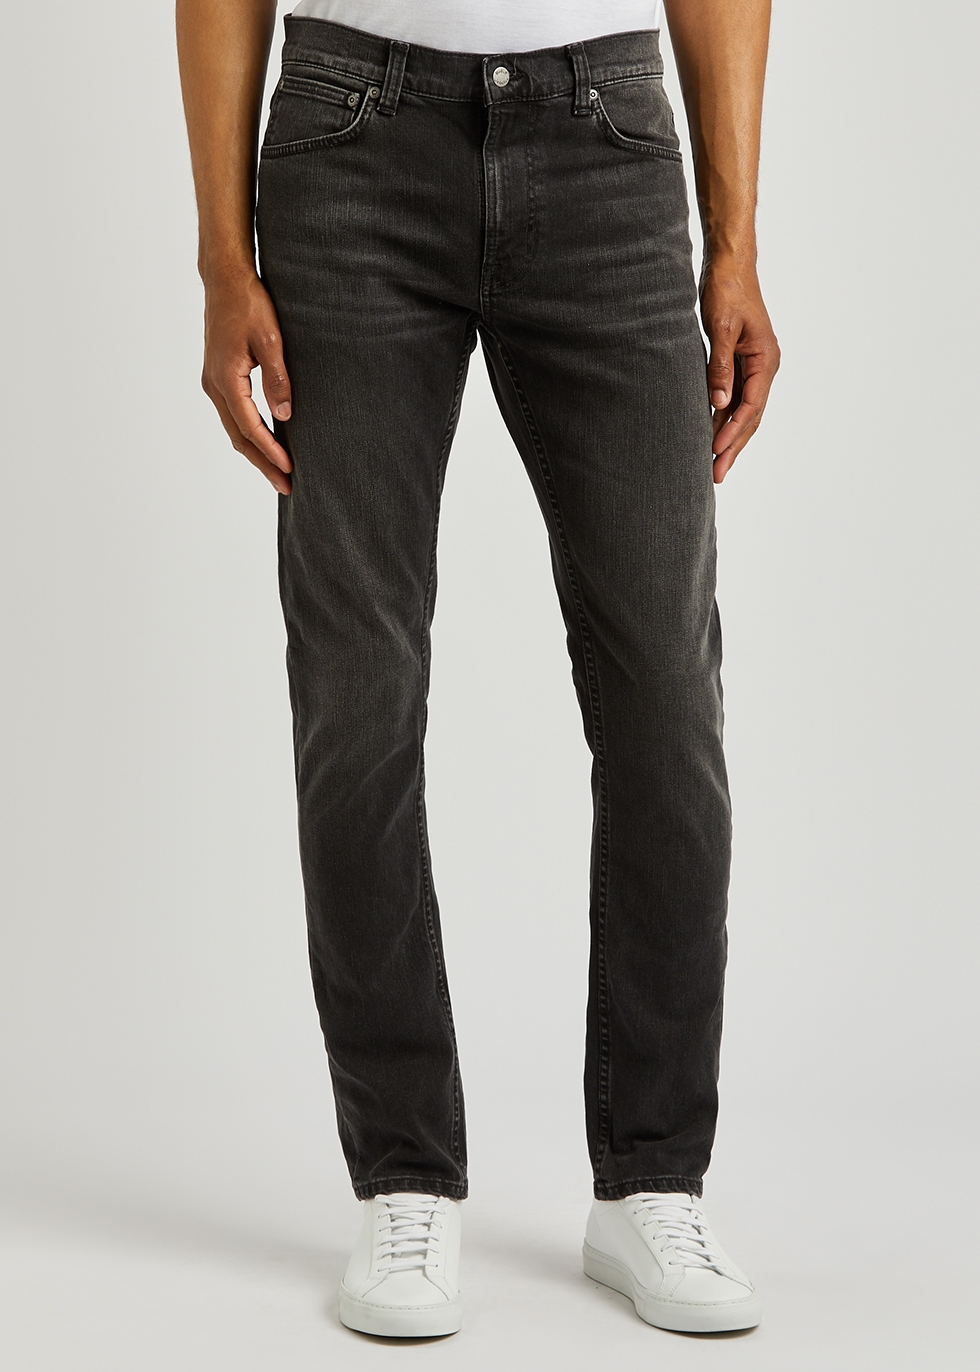 Federal navy brushed stretch-cotton chinos Harvey Nichols Men Clothing Jeans Stretch Jeans 